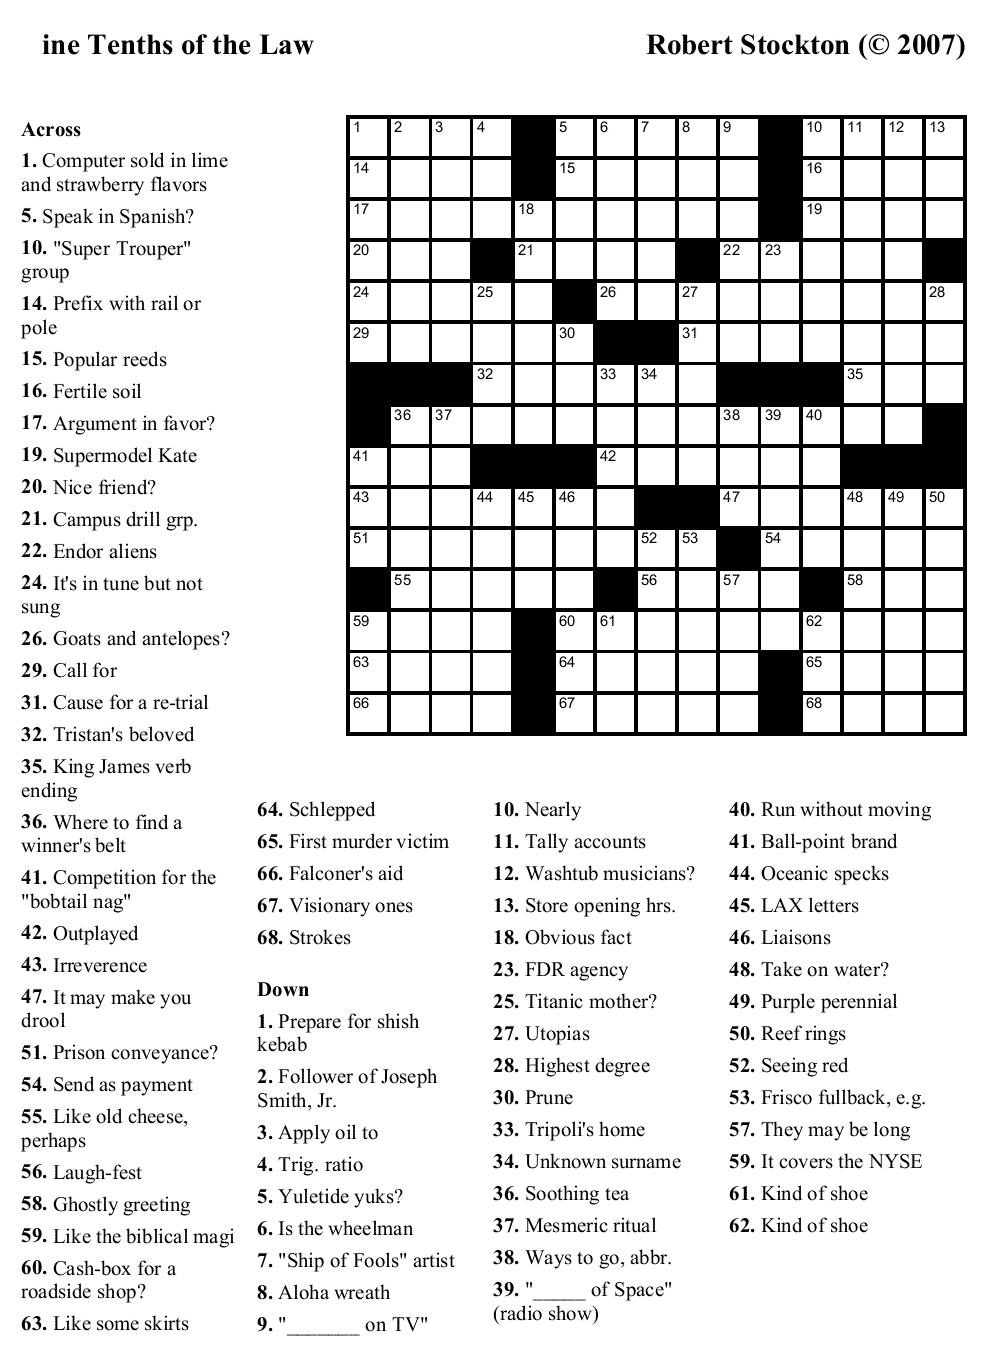 Crossword Puzzles Printable - Yahoo Image Search Results | Crossword - Printable Crossword Puzzles